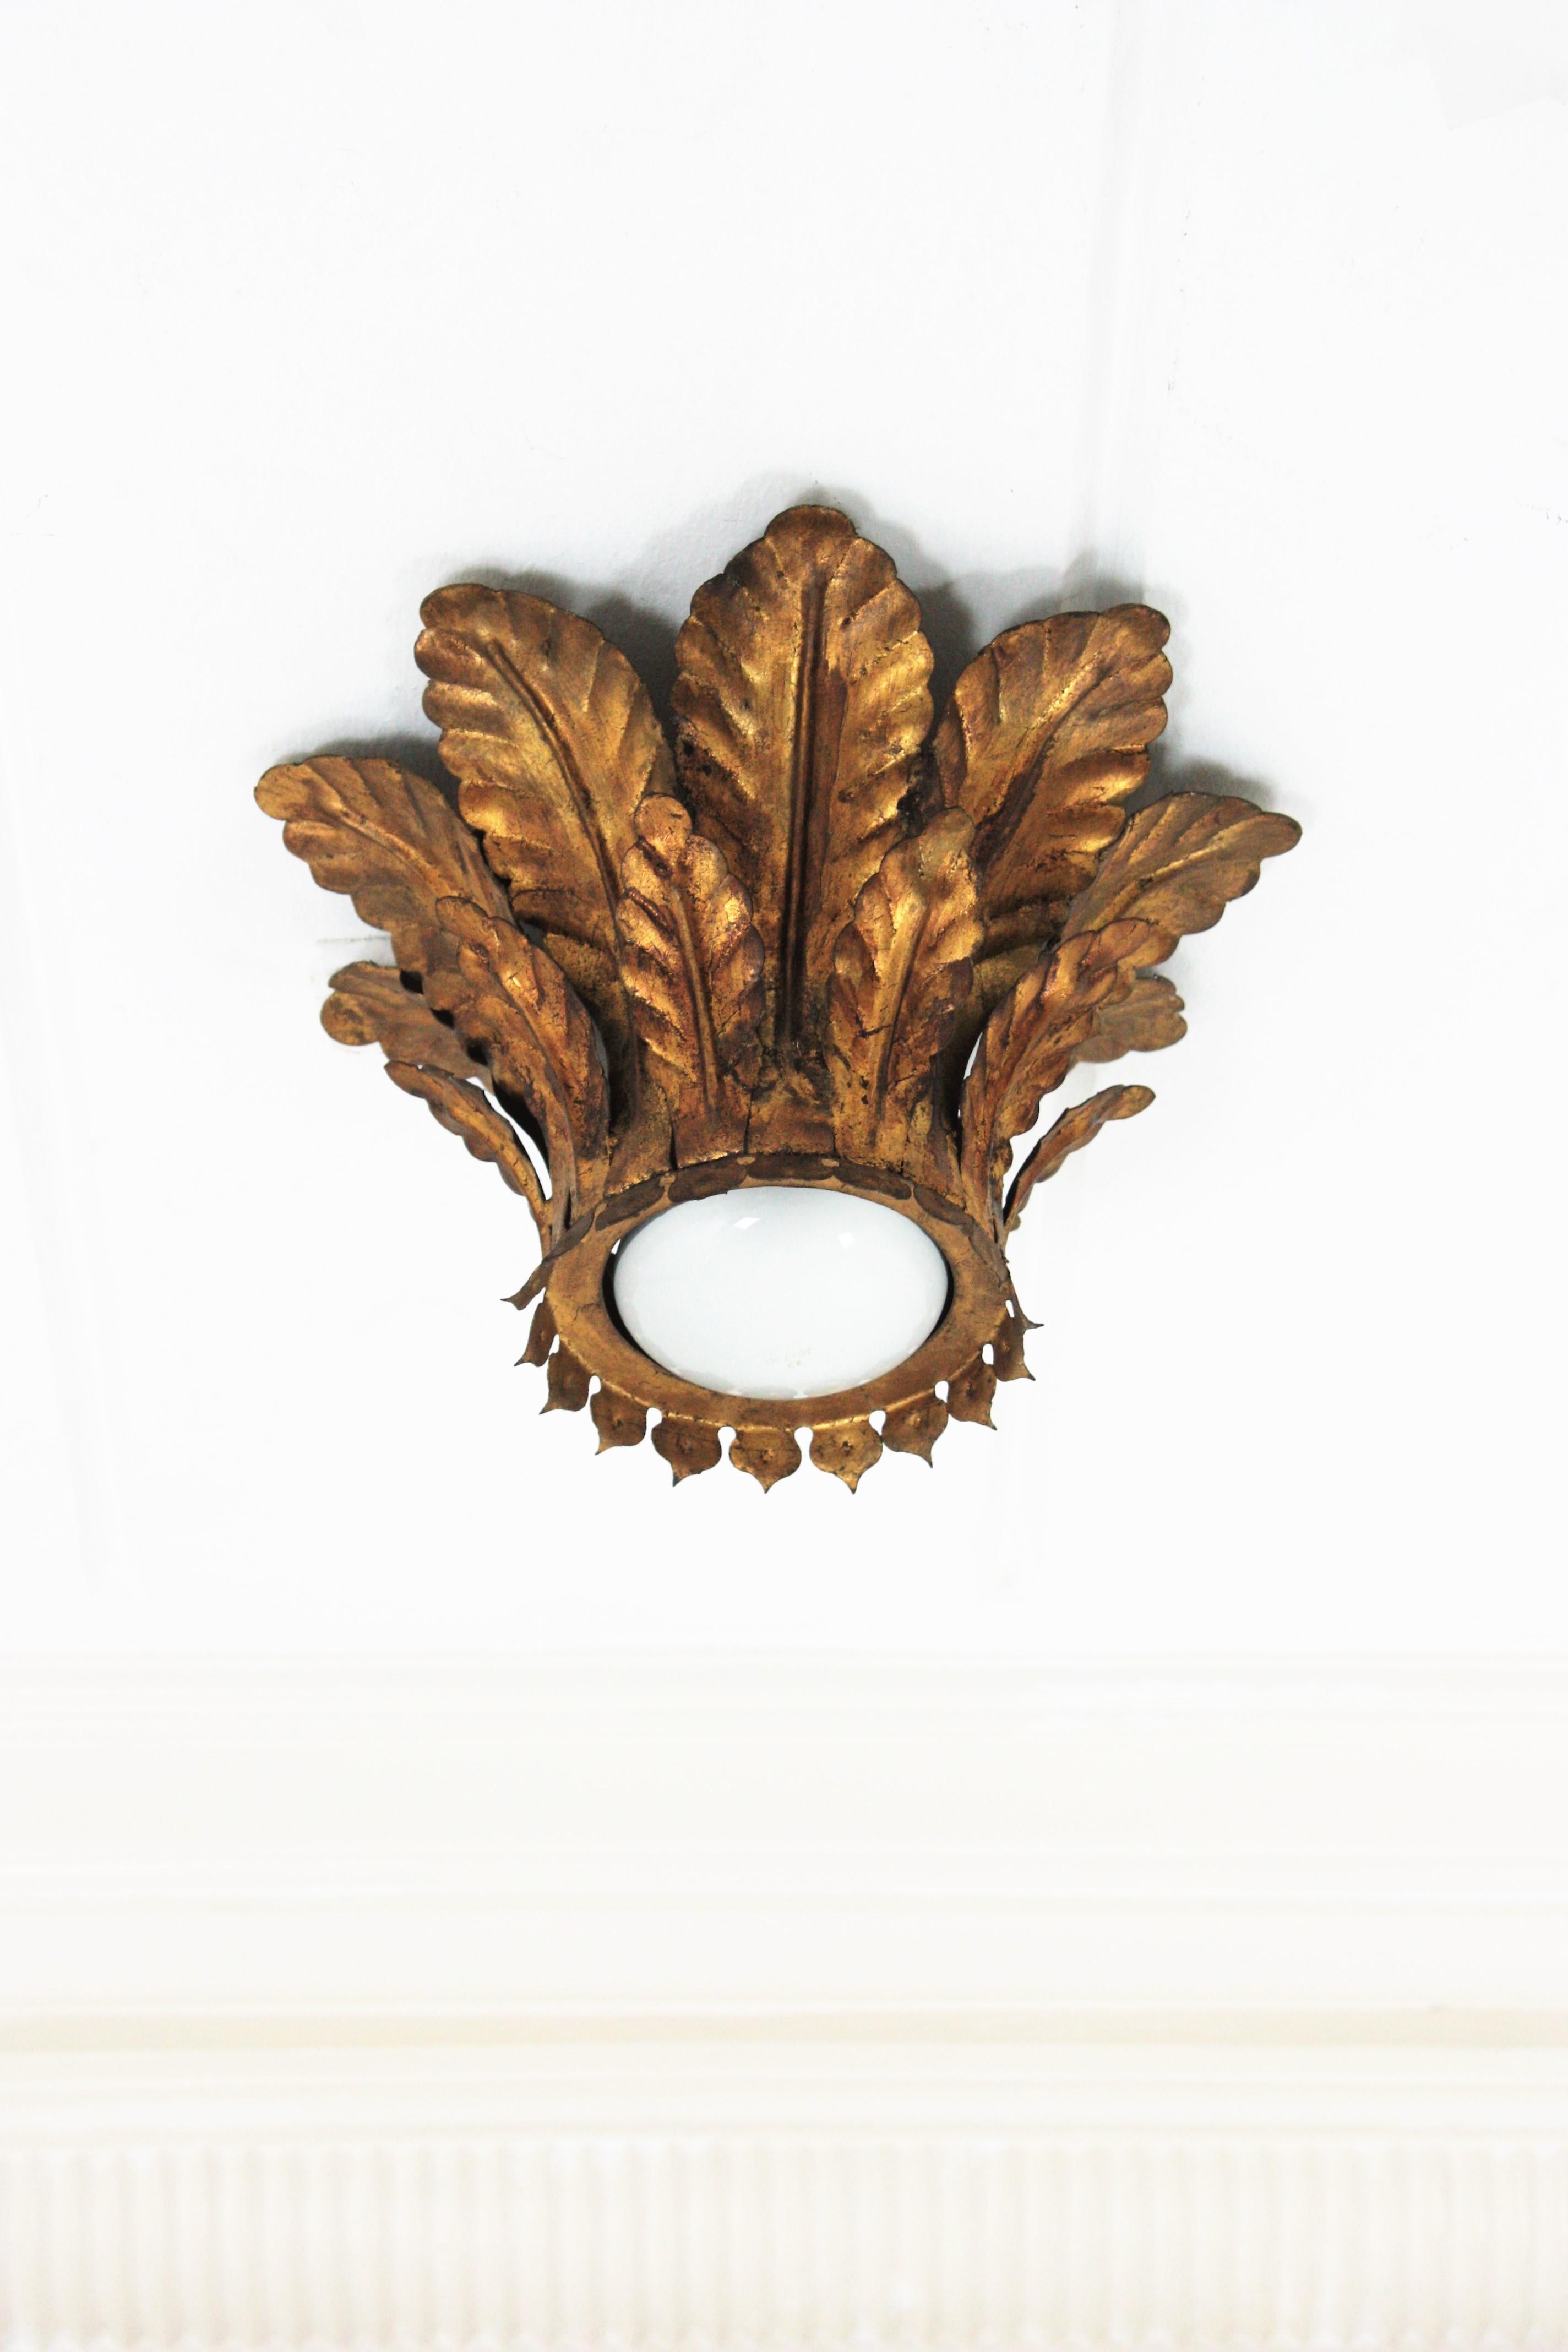 Sunburst light fixture with foliage frame, Gilt Wrought Iron, Spain, 1950s.
This eye-catching flush mount features a hancrafted crown shaped sunburst structure made of two layers of iron leaves surrounding a central light with an exposed bulb.